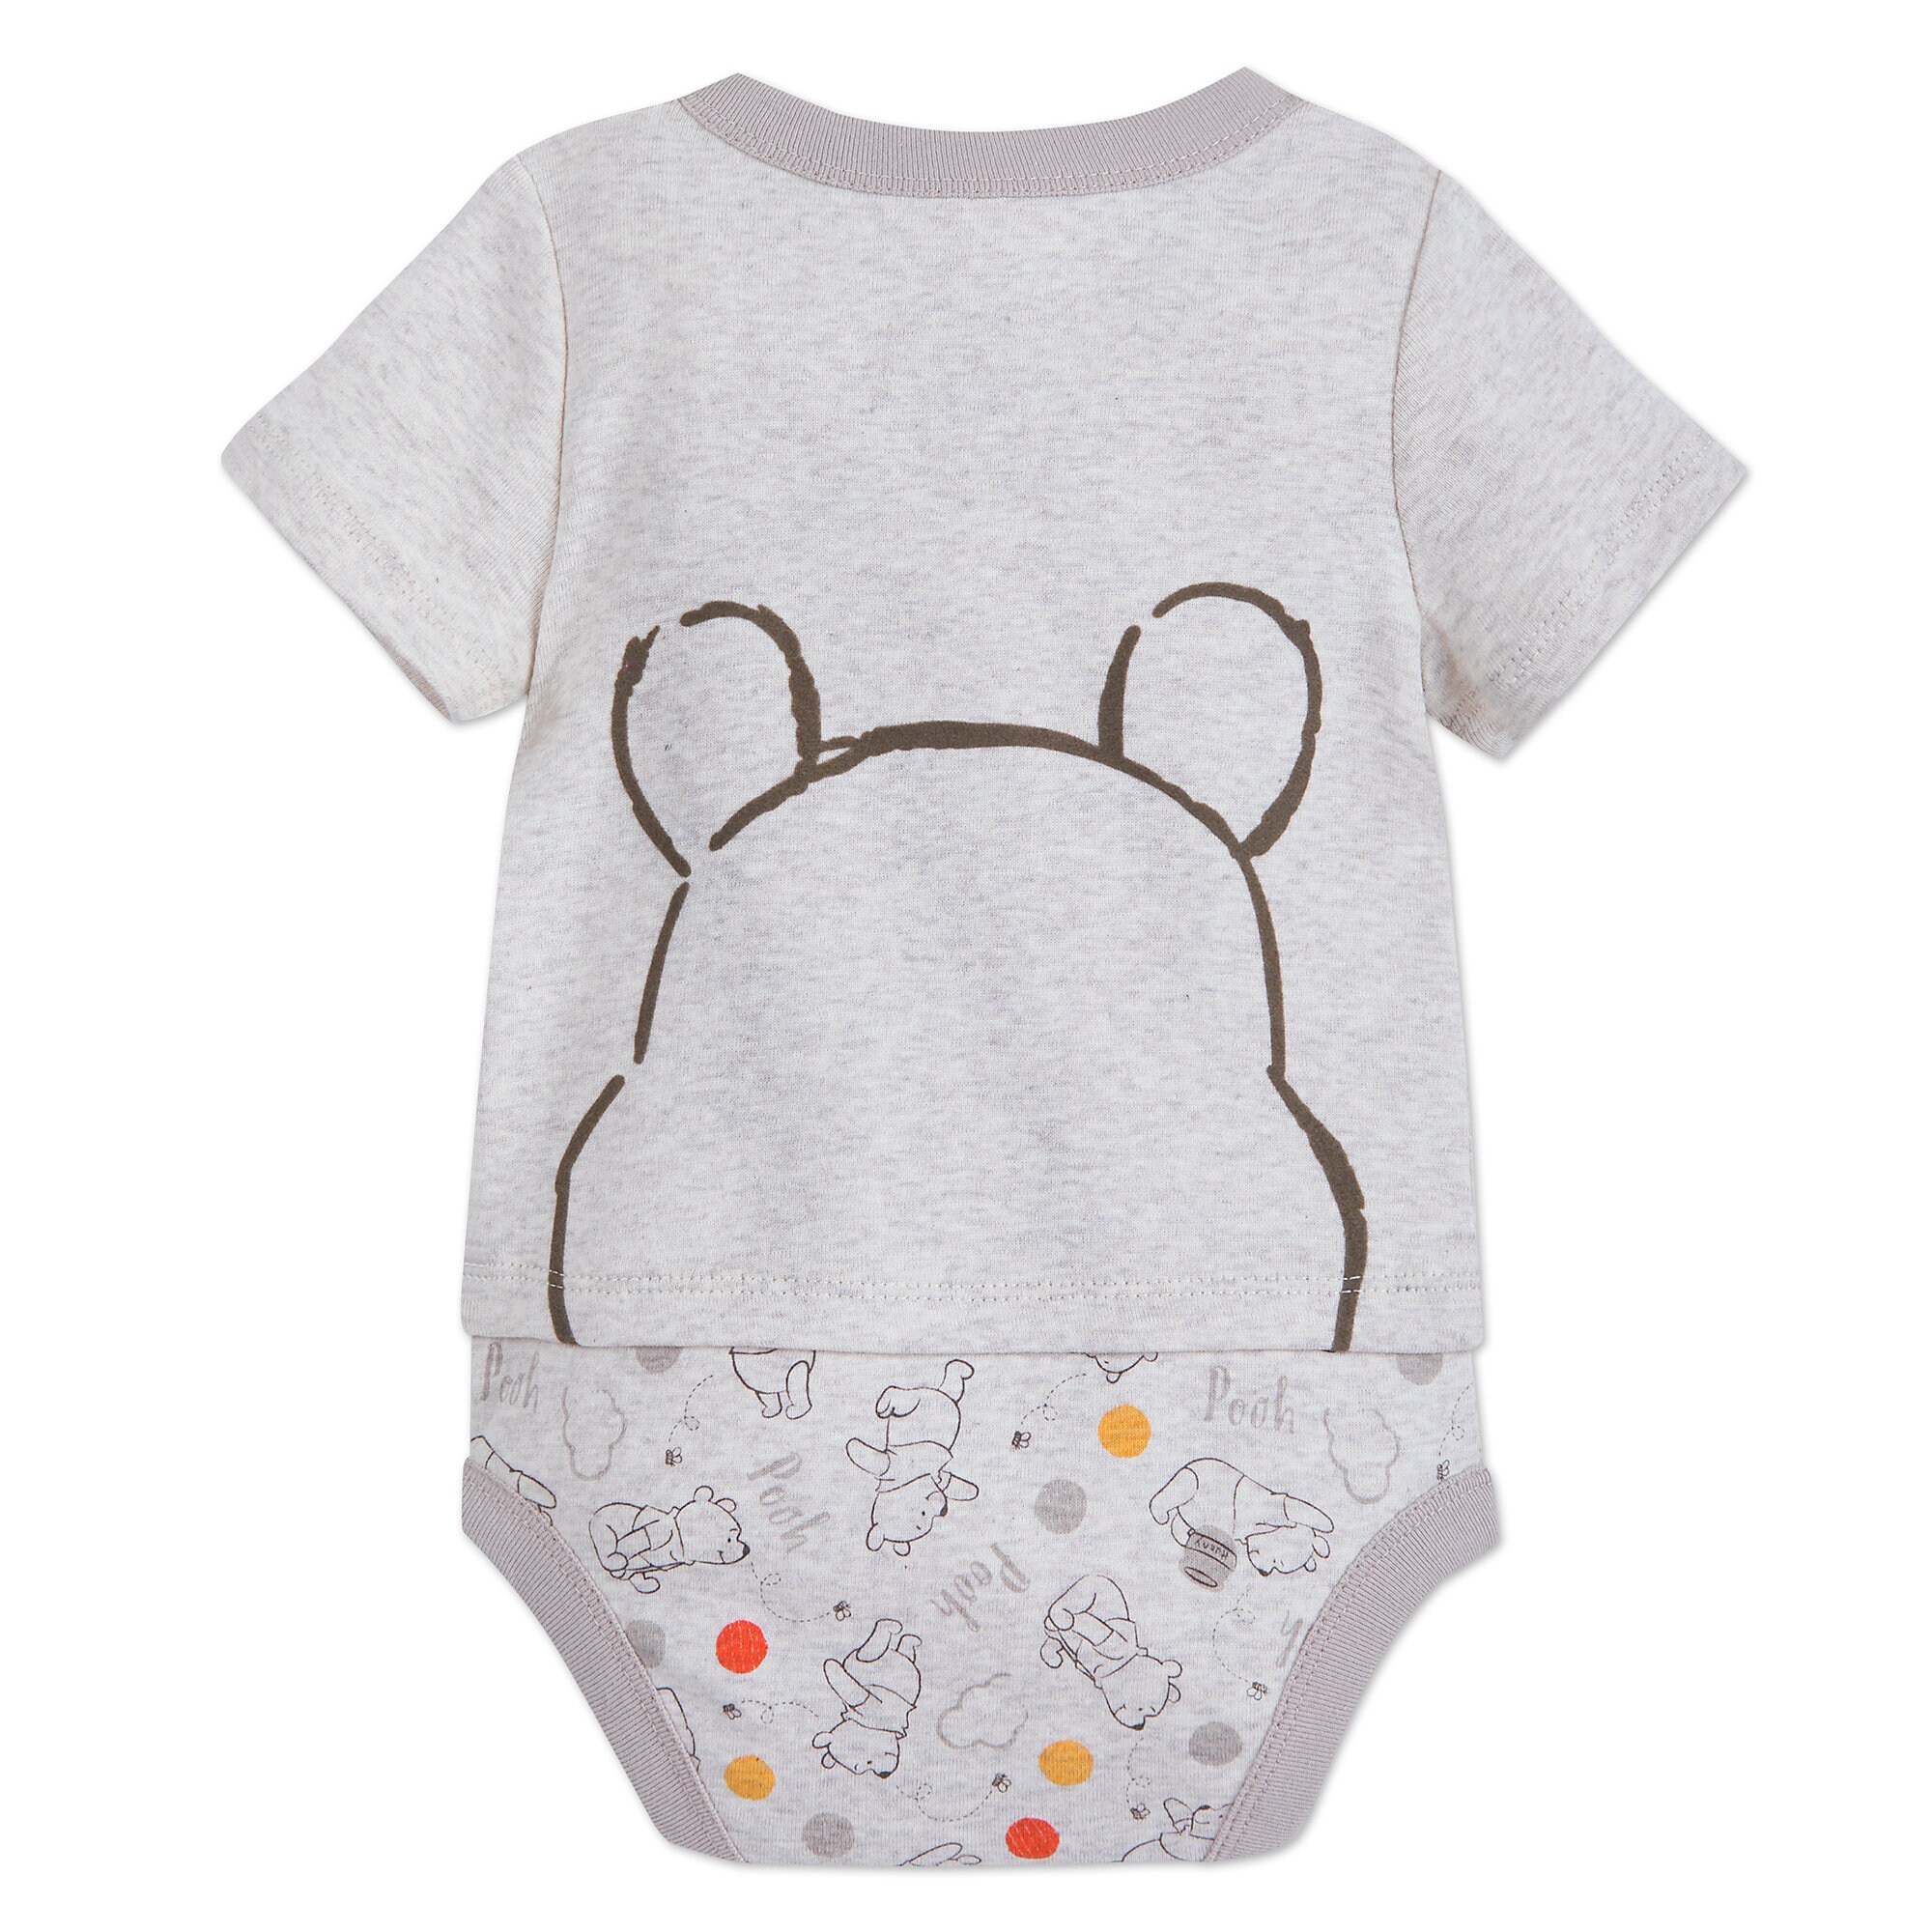 Winnie the Pooh Bodysuit for Baby